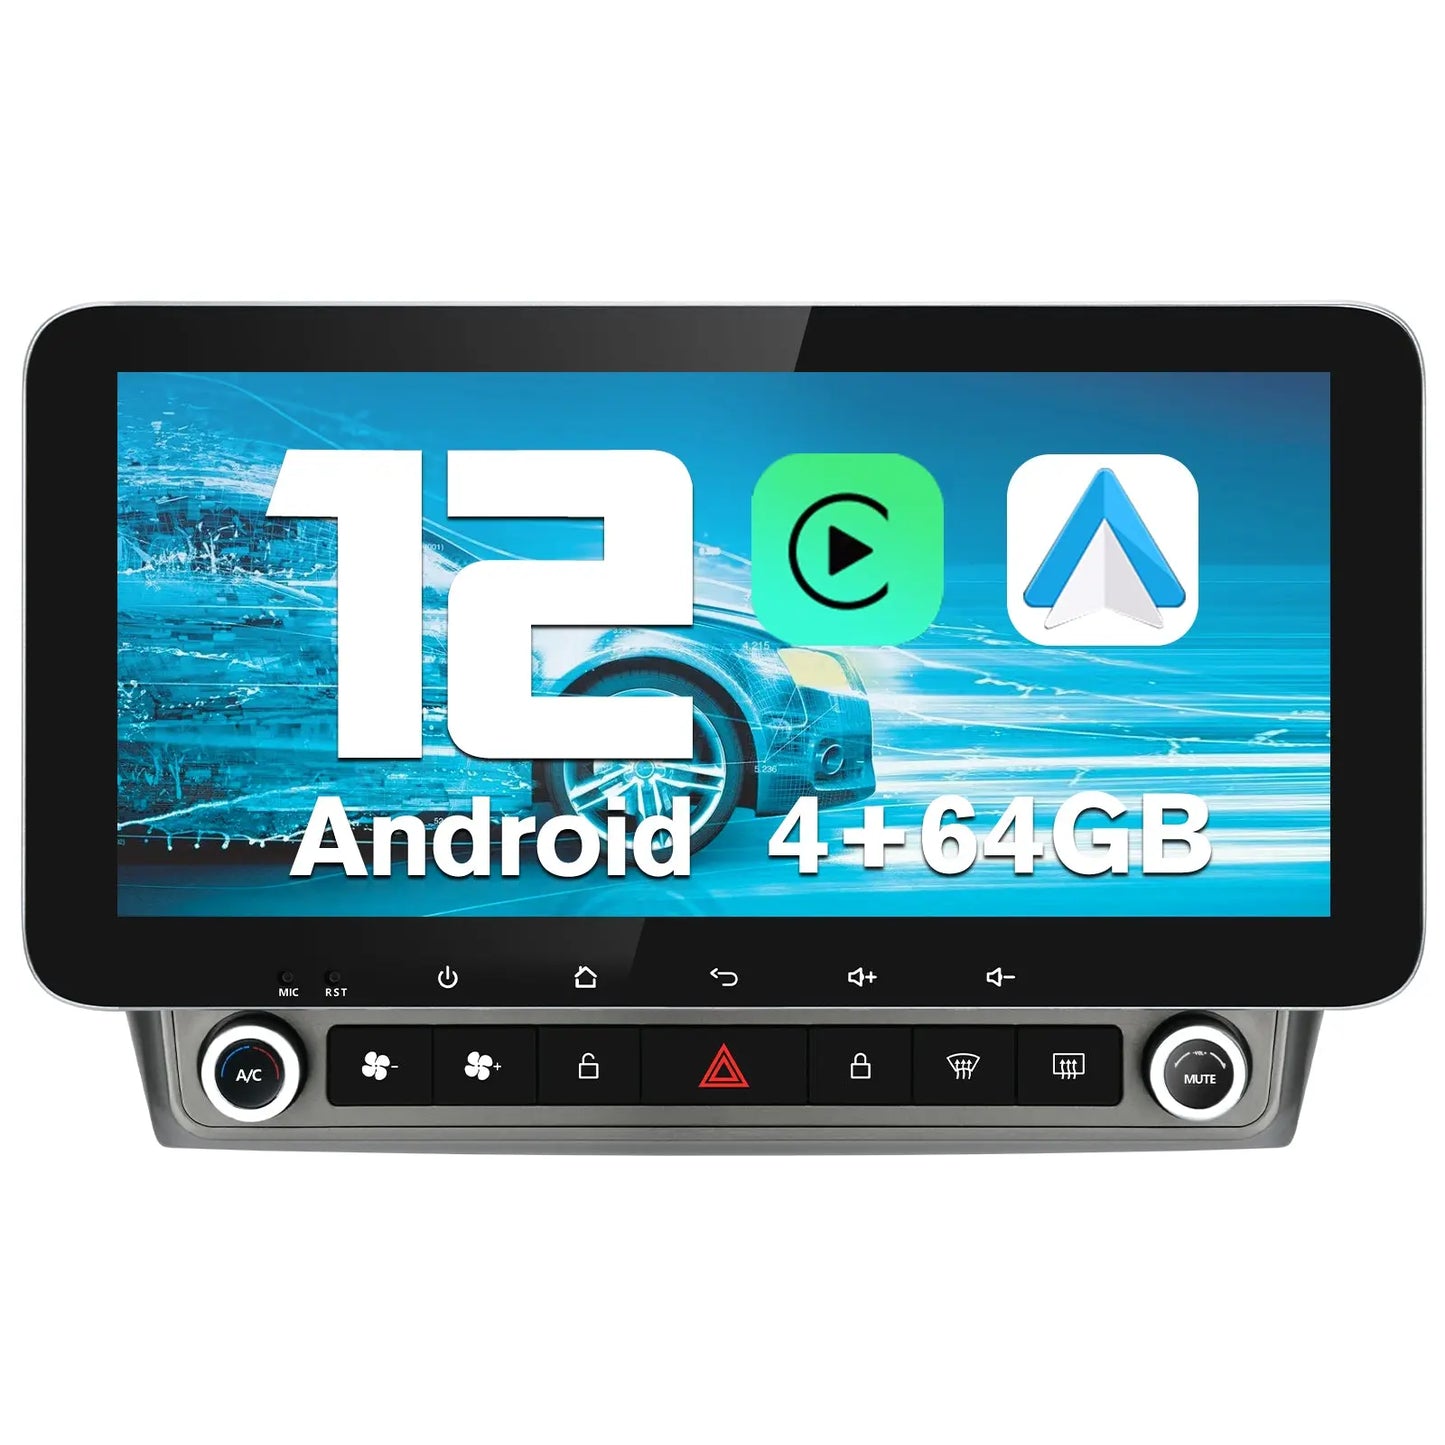 AWESAFE Android Car Stereo for Chevrolet Chevy Camaro 2010 2011 2012 2013 2014 2015, 10" Touch Screen Radio Upgarde WiFi Bluetooth 4G Online GPS Navigation CarPlay Android Auto, 4GB+64GB AWESAFE SHOP